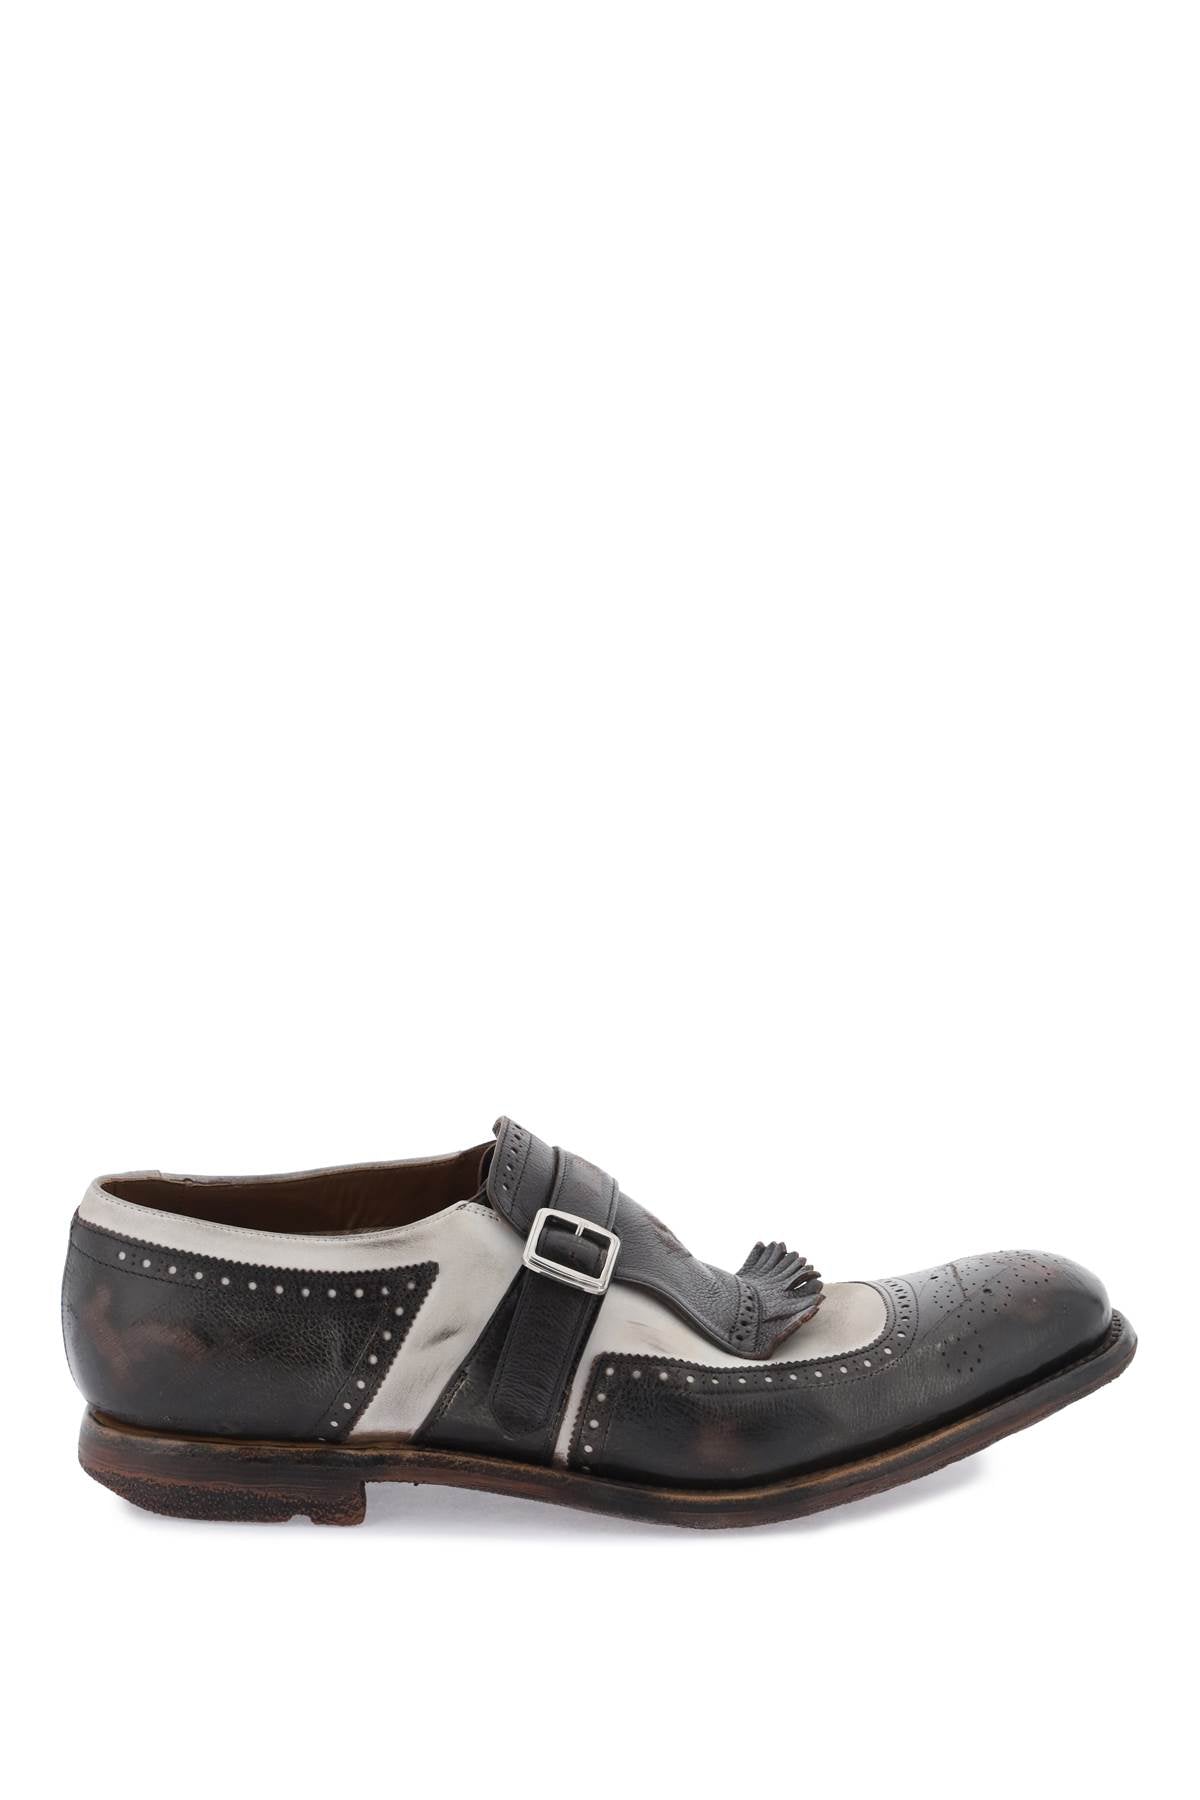 Shop Church's Shanghai Loafers In White, Brown